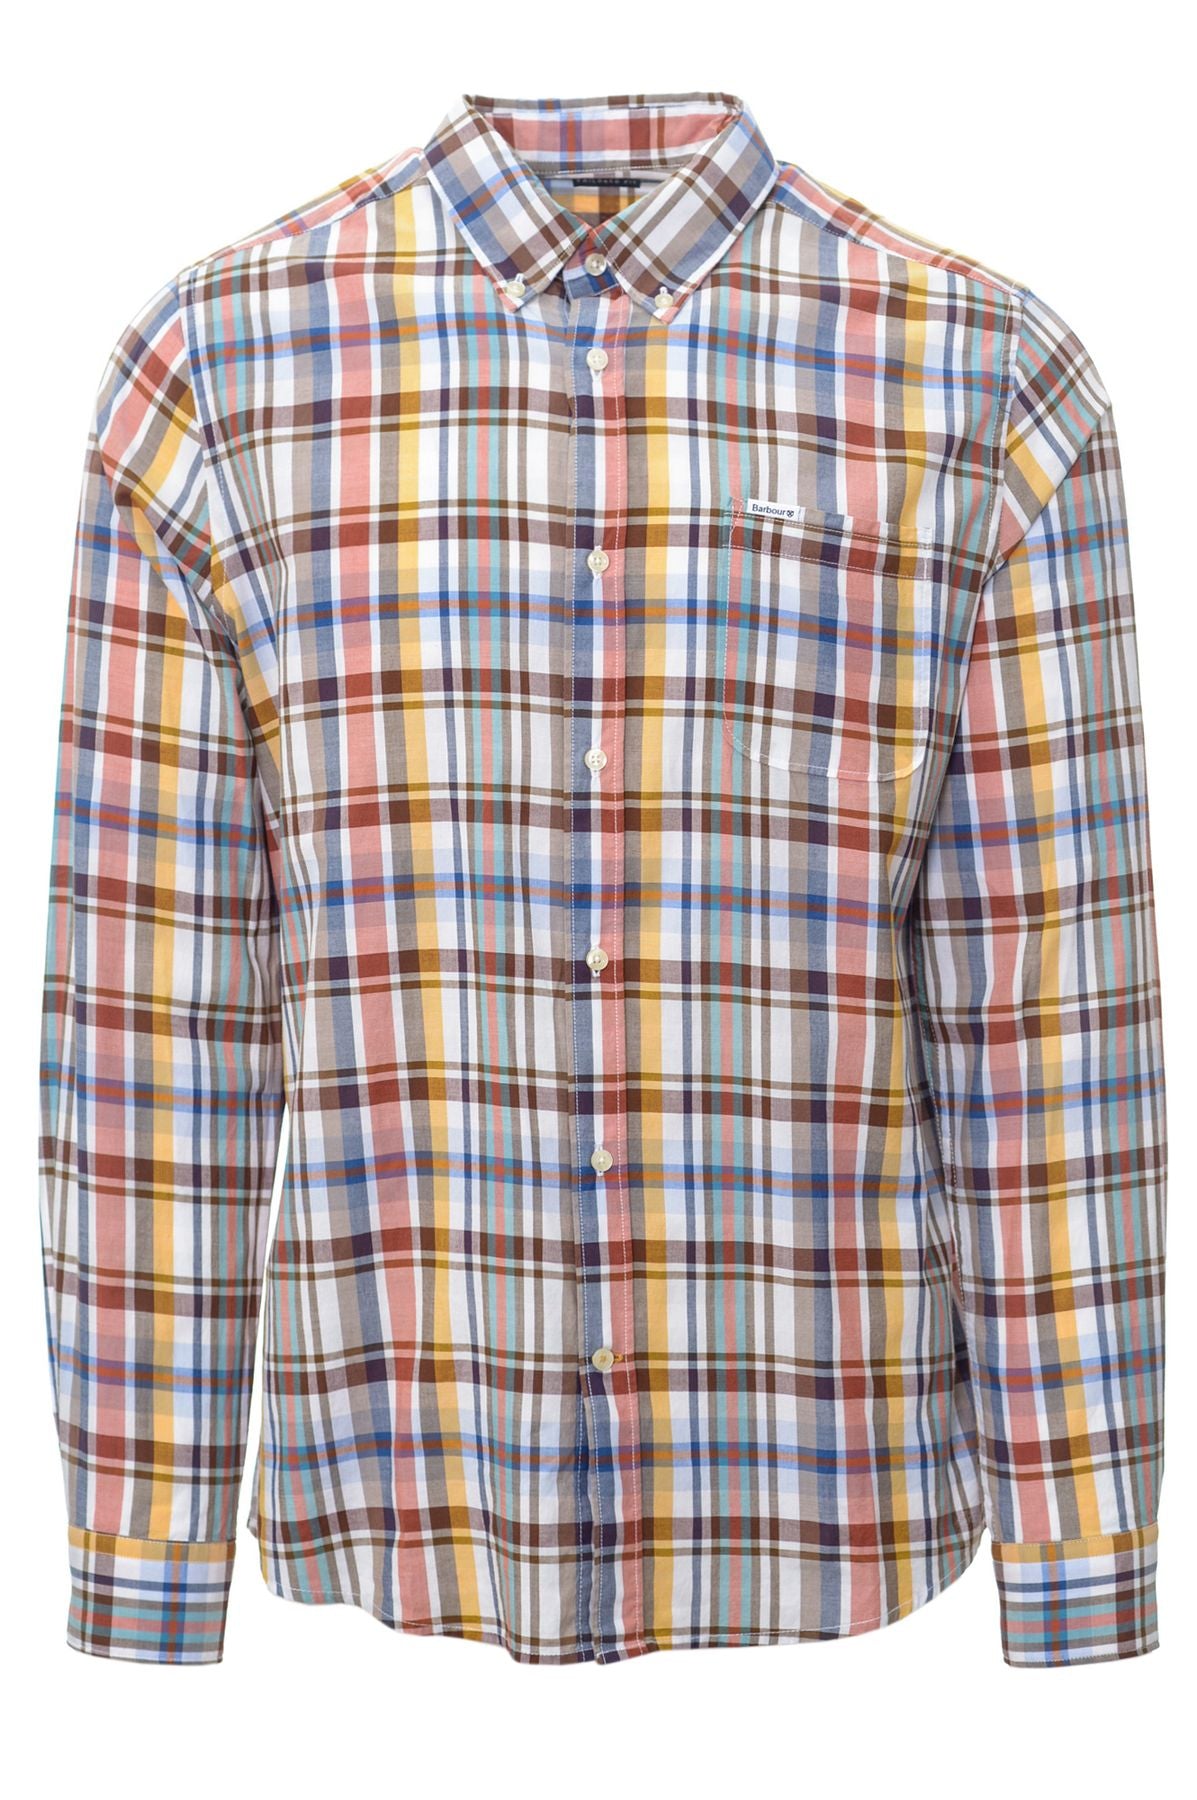 BARBOUR Spring/Summer Cotton Shirts